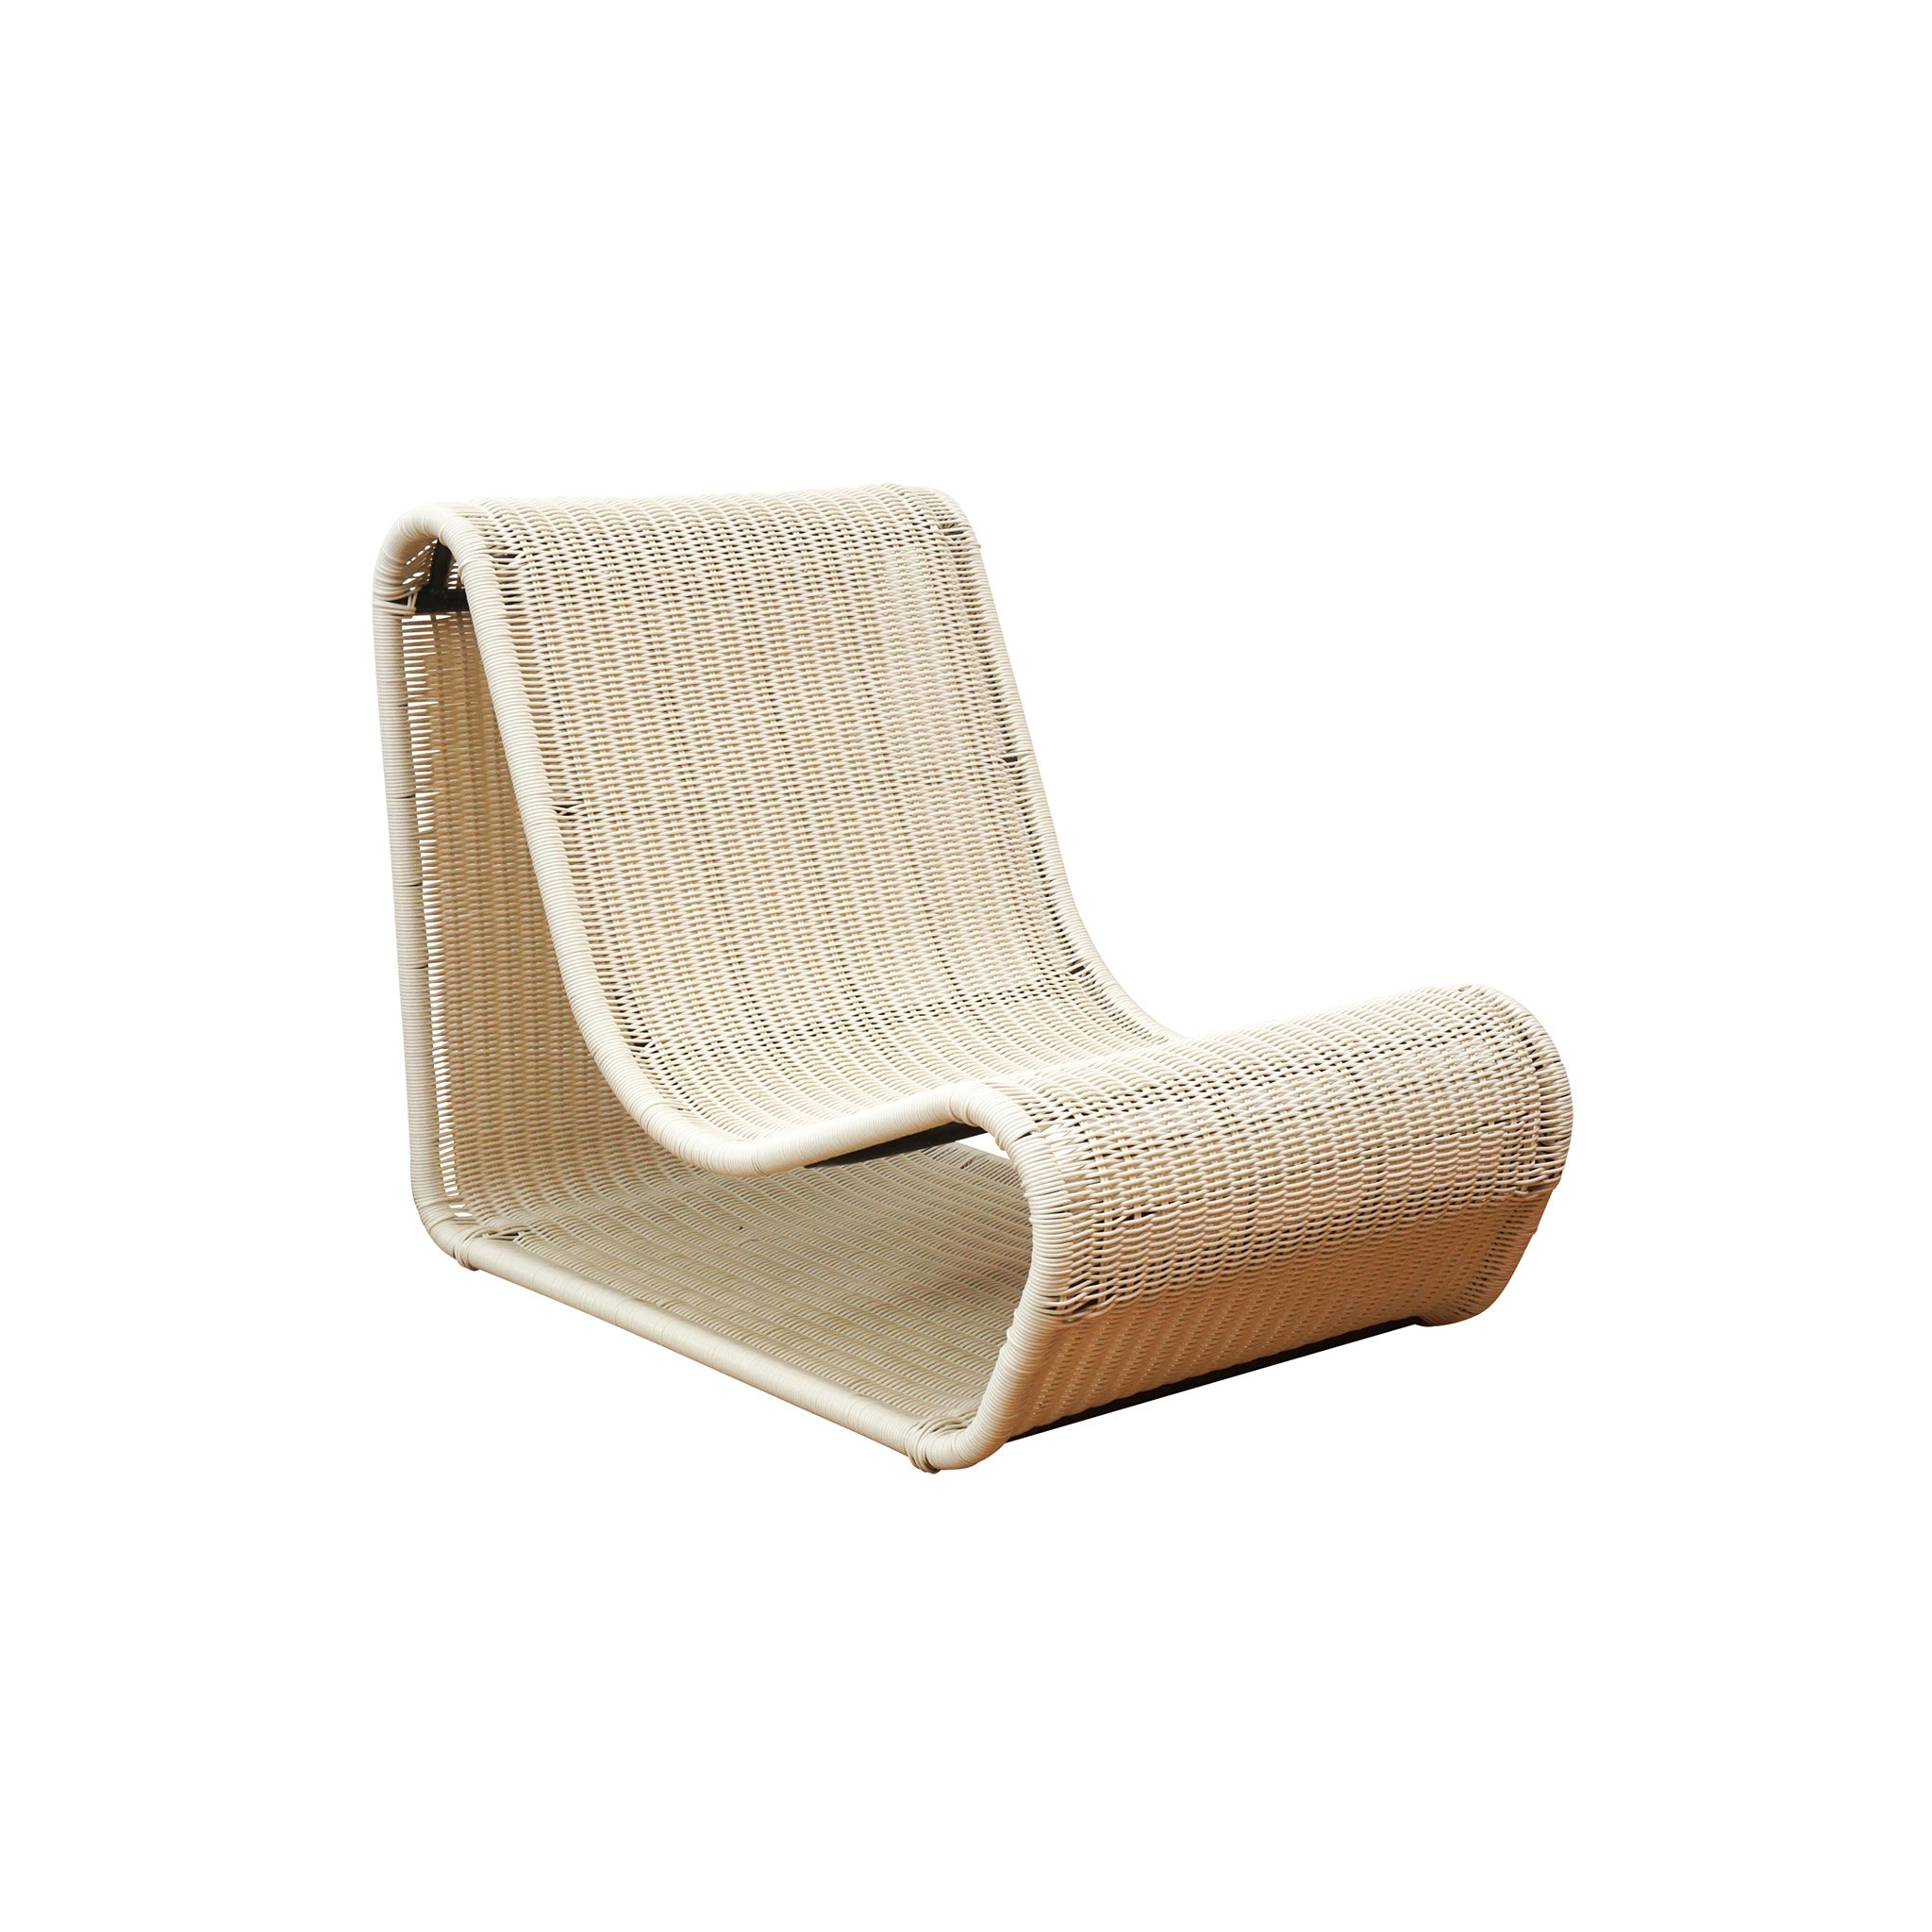 Our Esperanza outdoor lounge chairs are made for style, comfort and durability. Inspired by the classic Willy Guhl Loop chair, the Esperanza outdoor lounge chair is constructed with a durable metal frame and covered in tight woven polypropylene. The